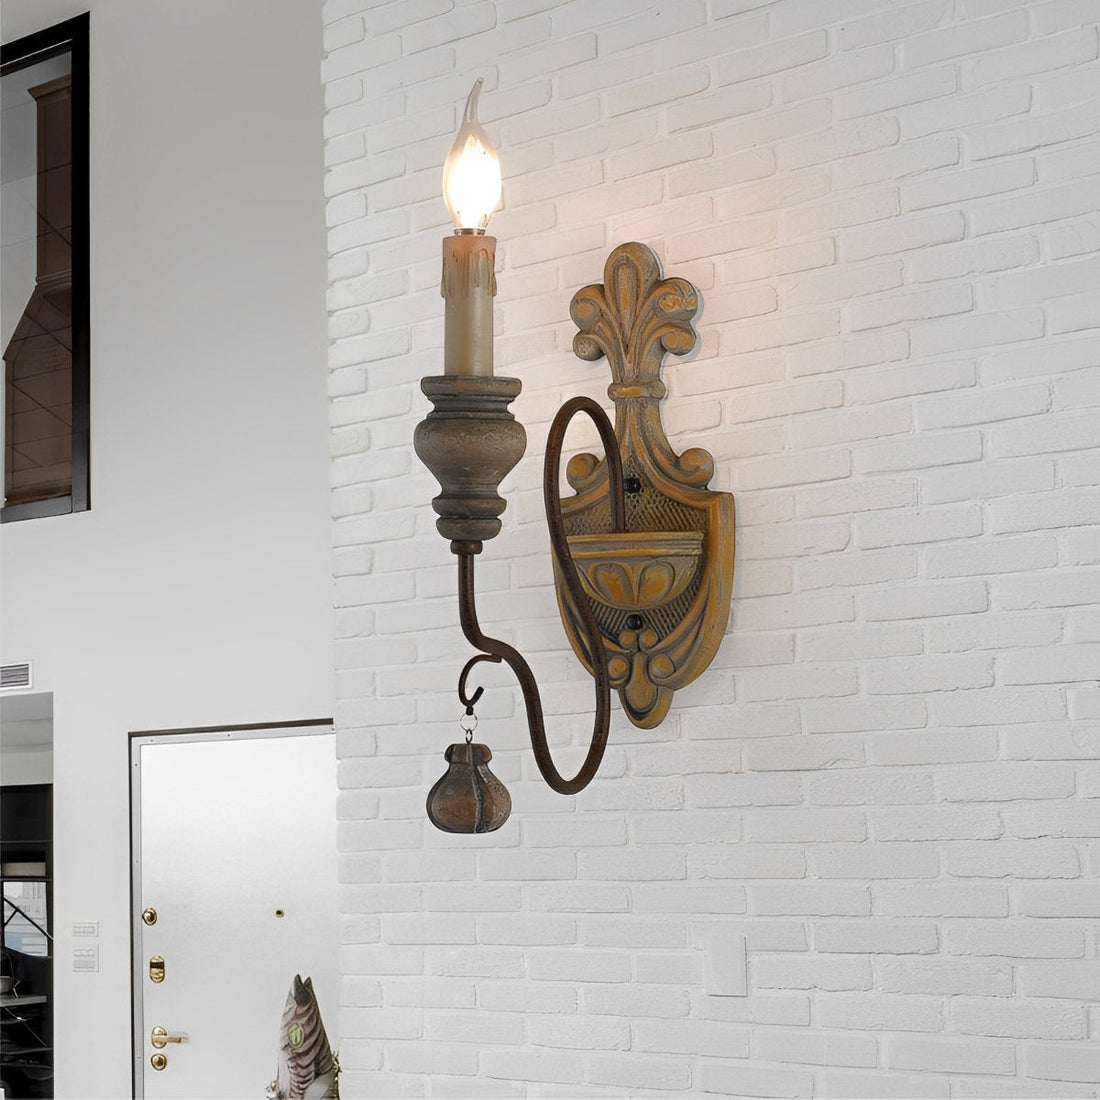 Retro Distressed Candlestick Wall Sconces Light - Flyachilles